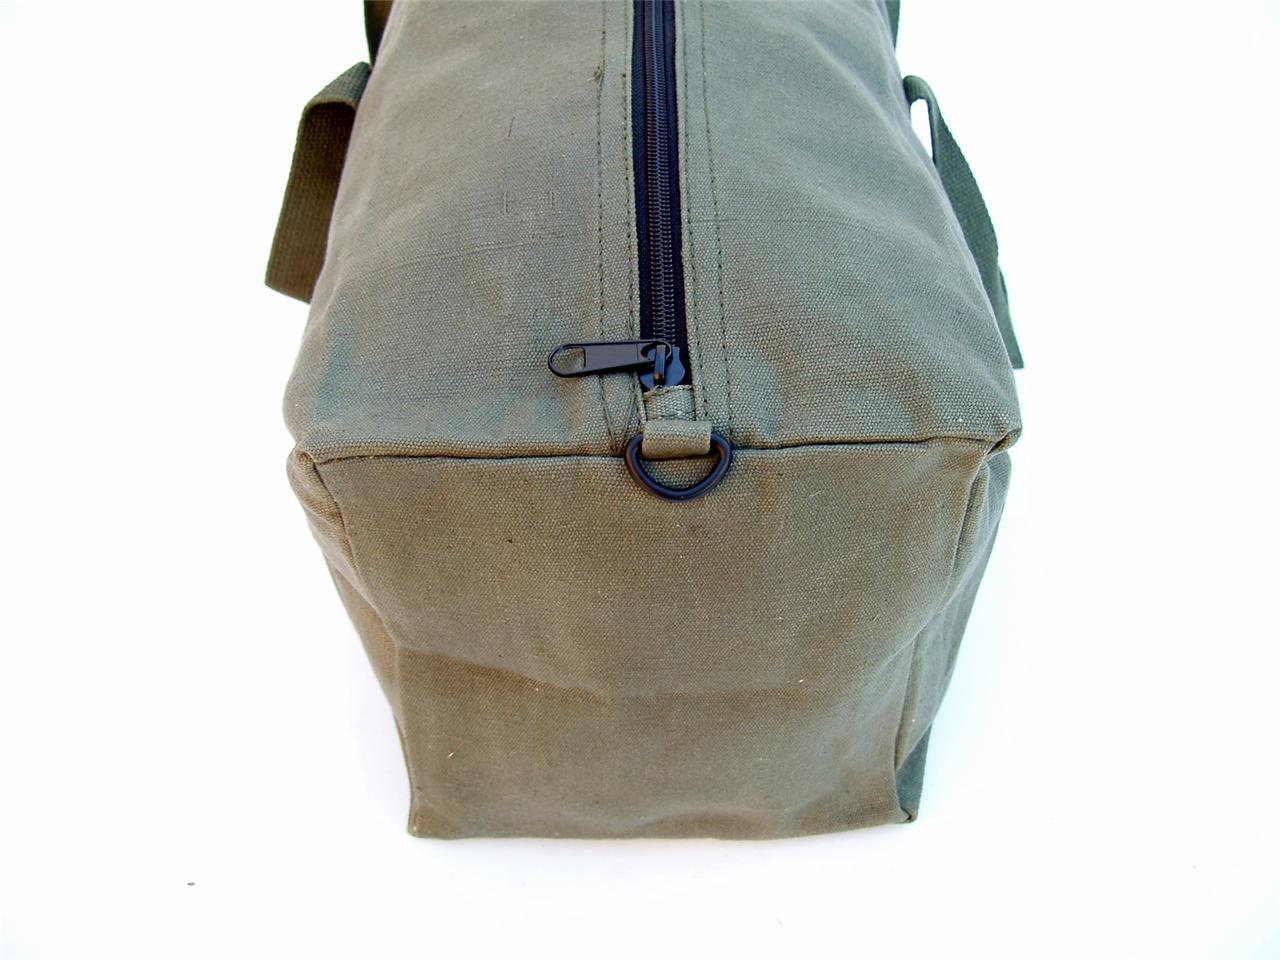 New Heavy Duty Canvas Tool Carry Bag Travel Luggage Duffel Duffle Tote Zip 3Size | eBay